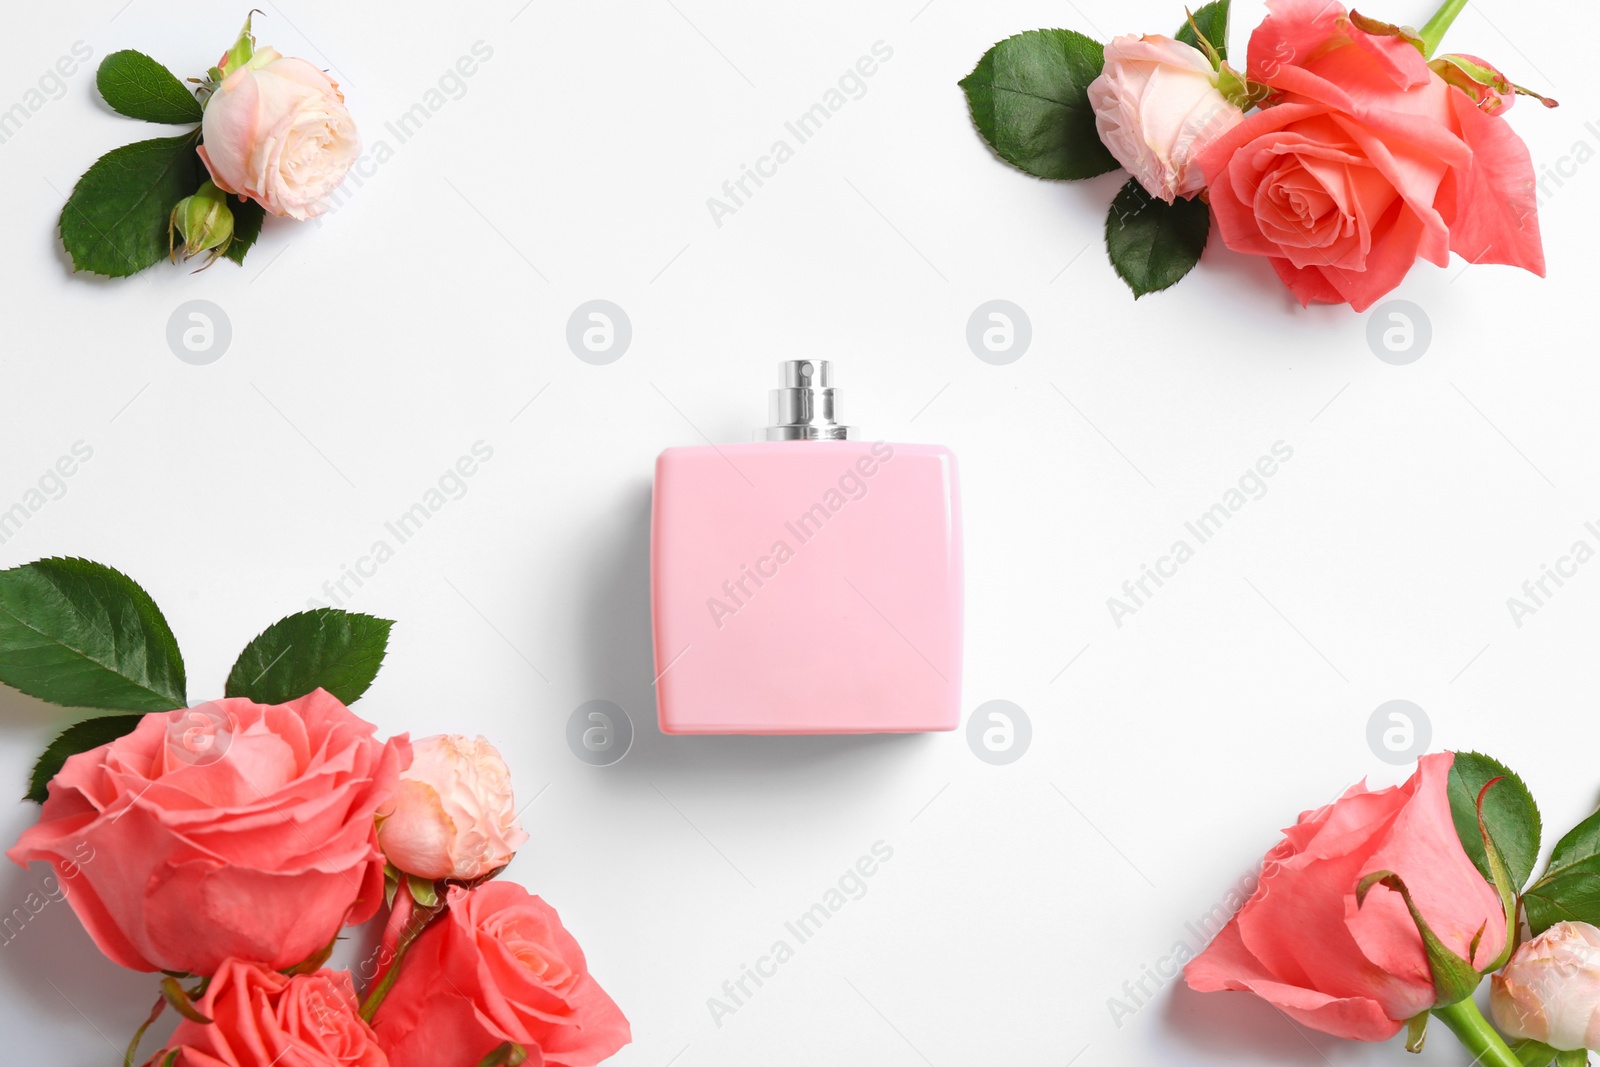 Photo of Bottle of perfume and roses on white background, top view